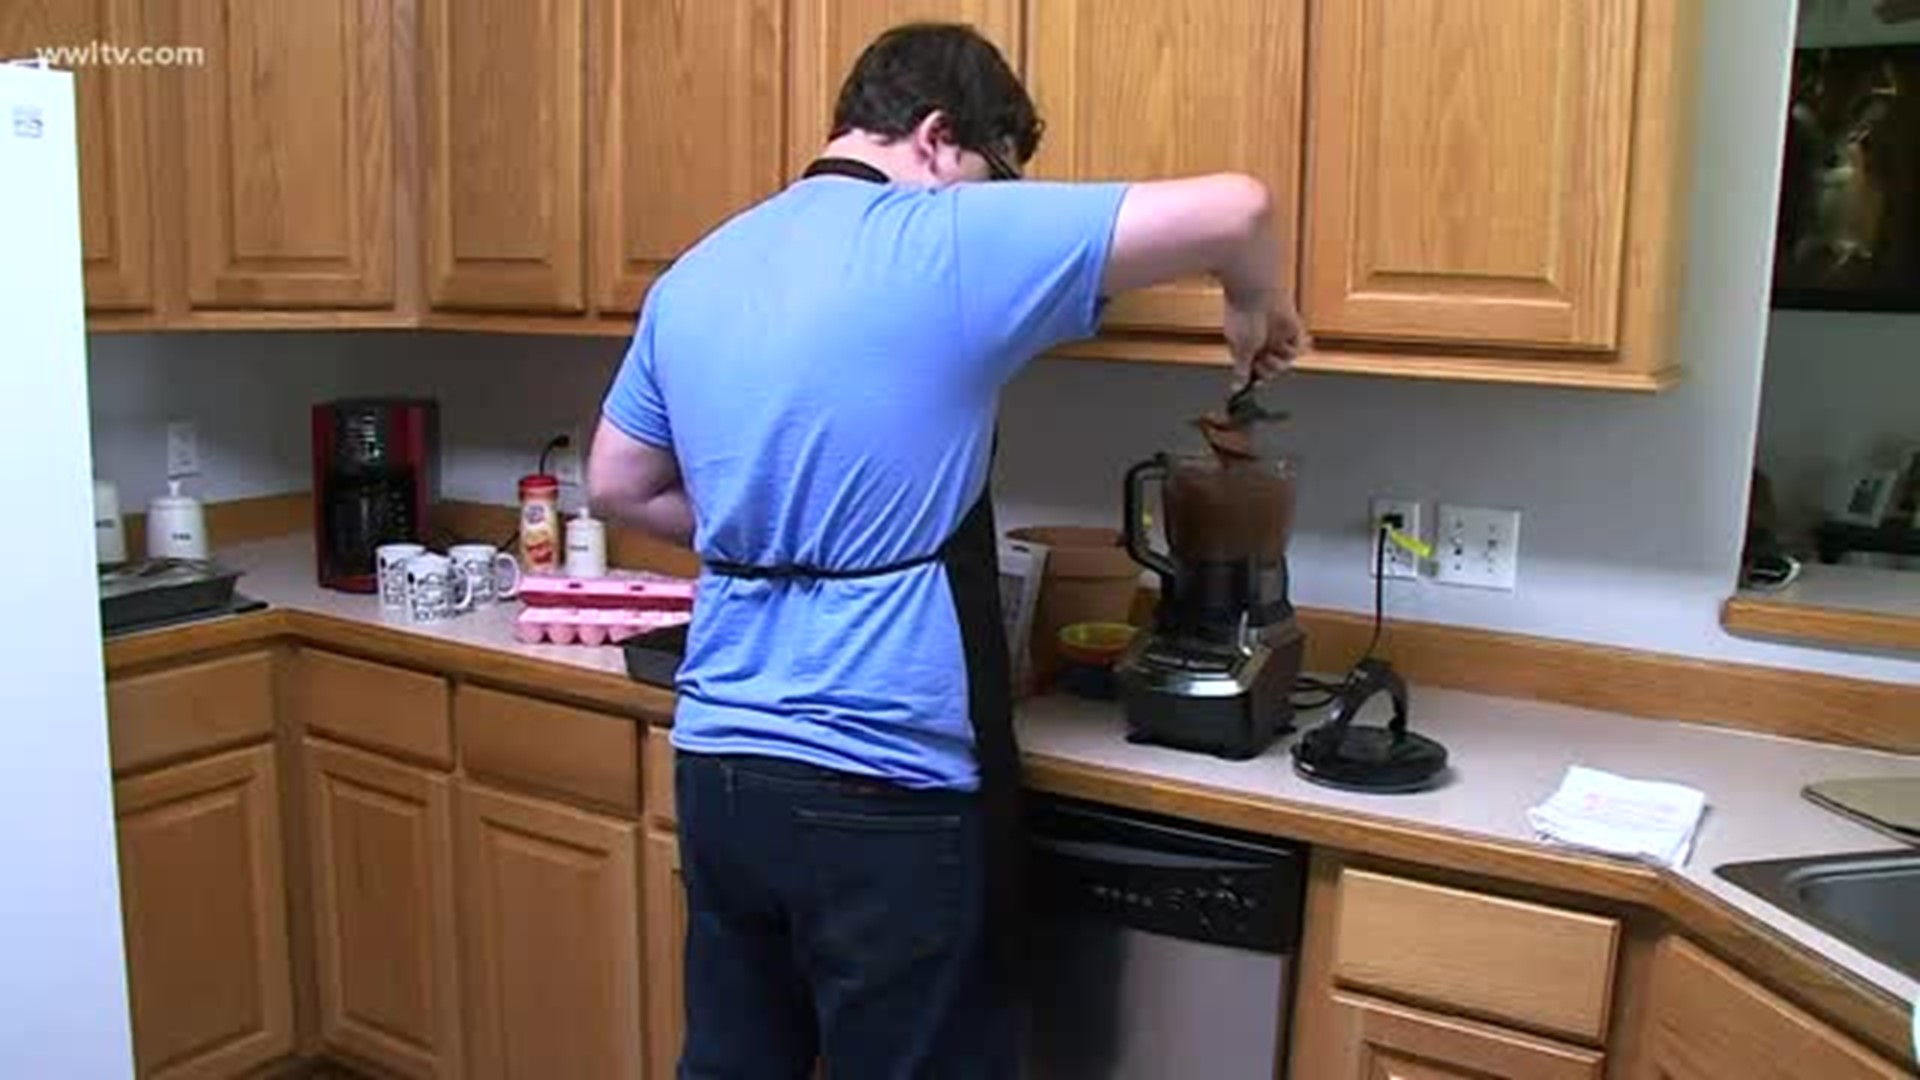 Teen chef with autism overcomes bullying with baking